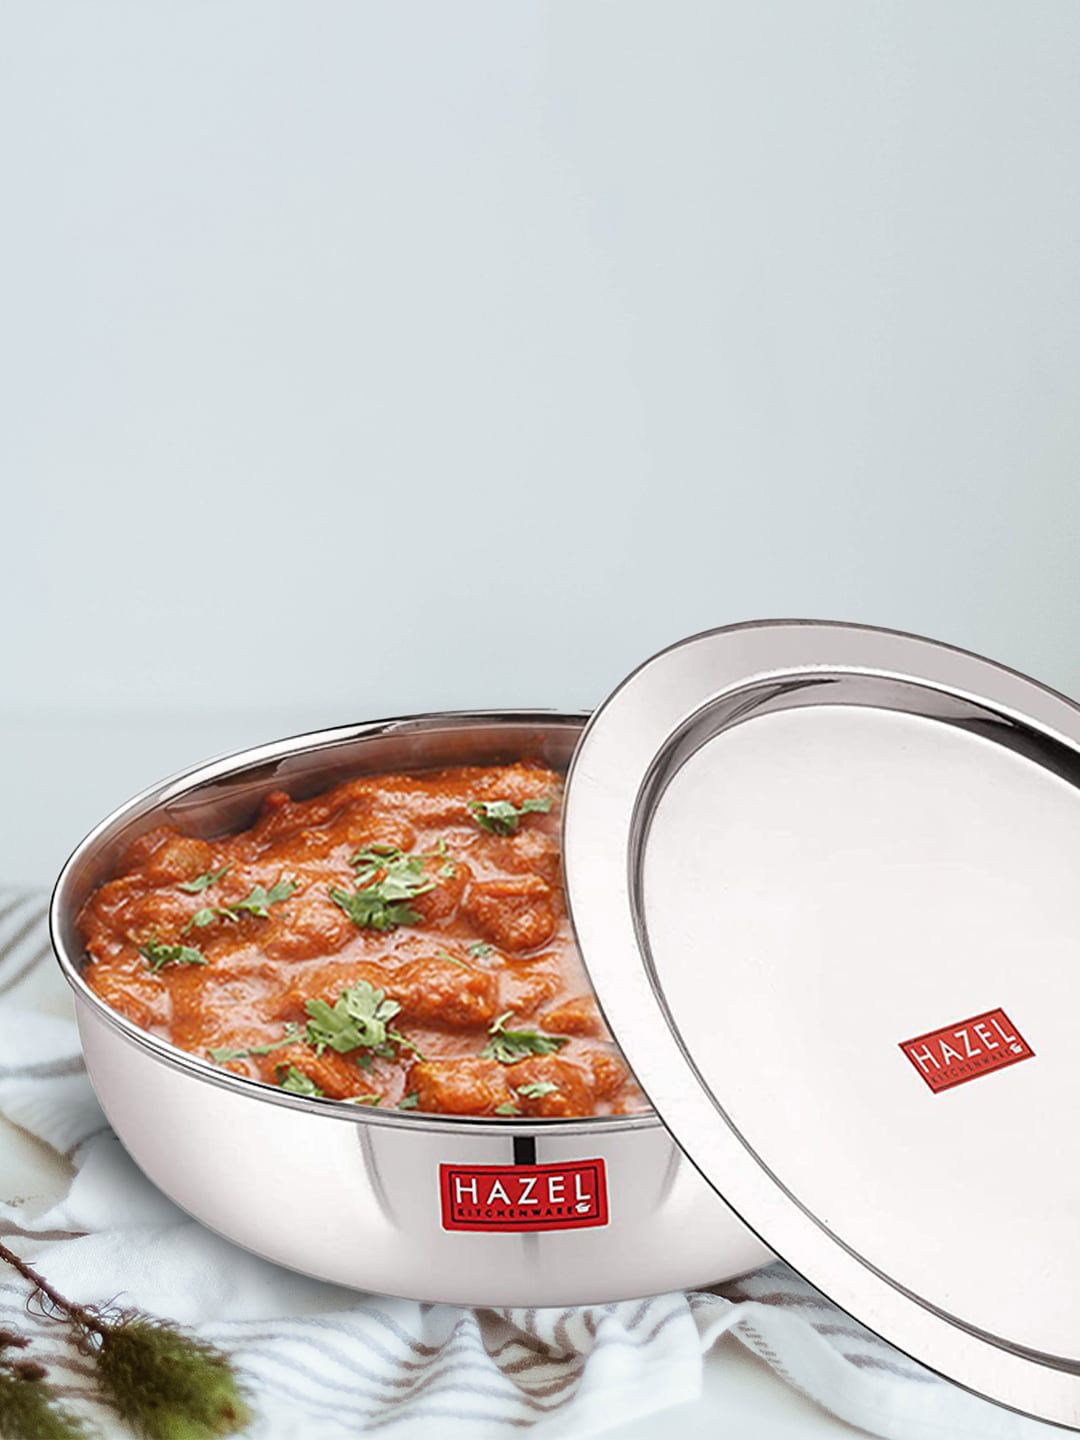 HAZEL Silver-Toned Solid Stainless Steel Kadai With Lid Price in India